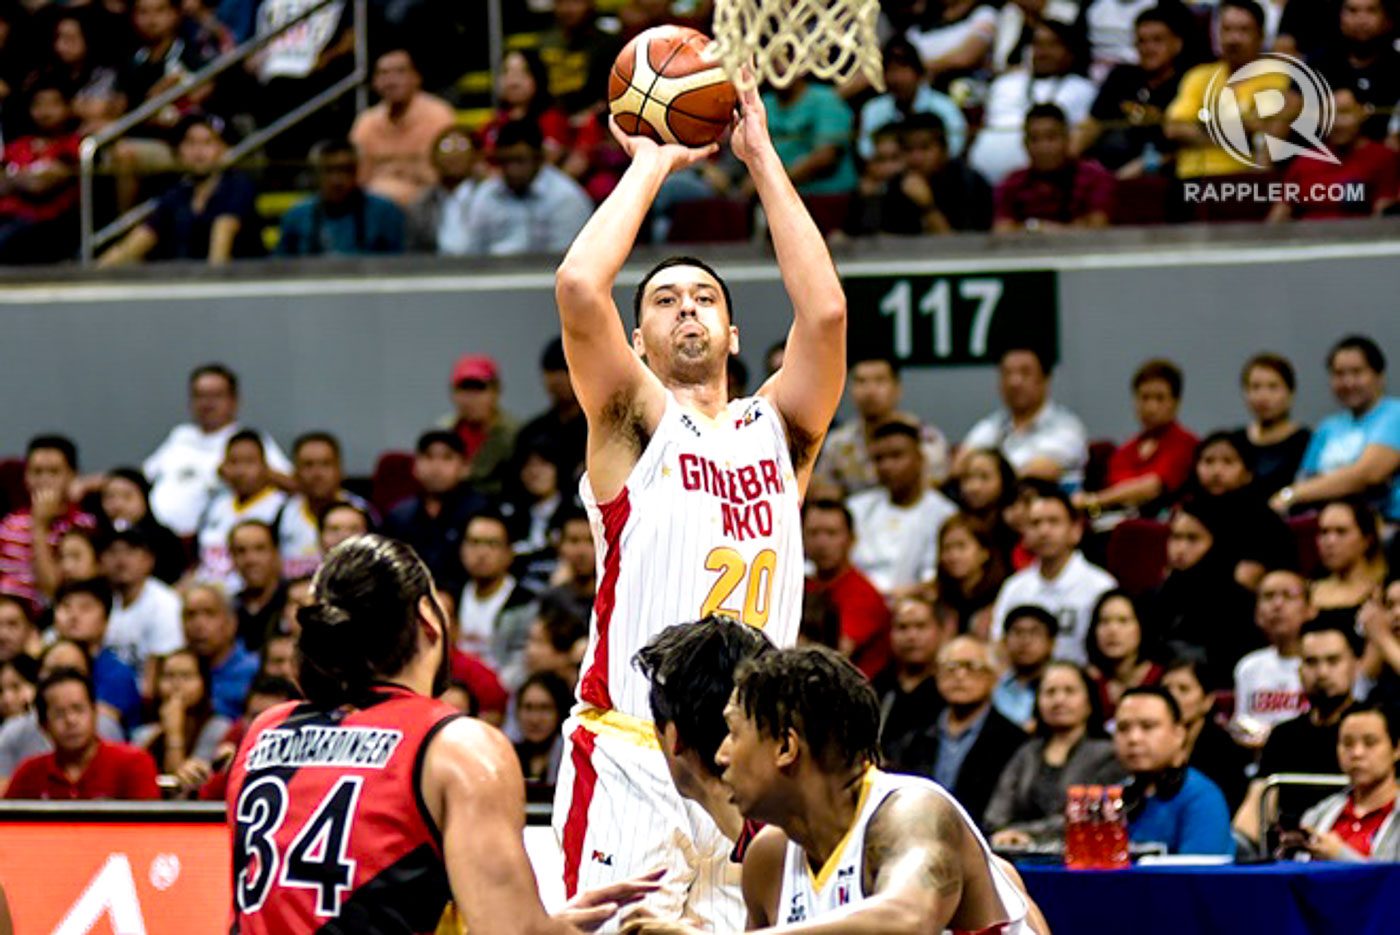 FIBA: Greg Slaughter cleared to play as Gilas local